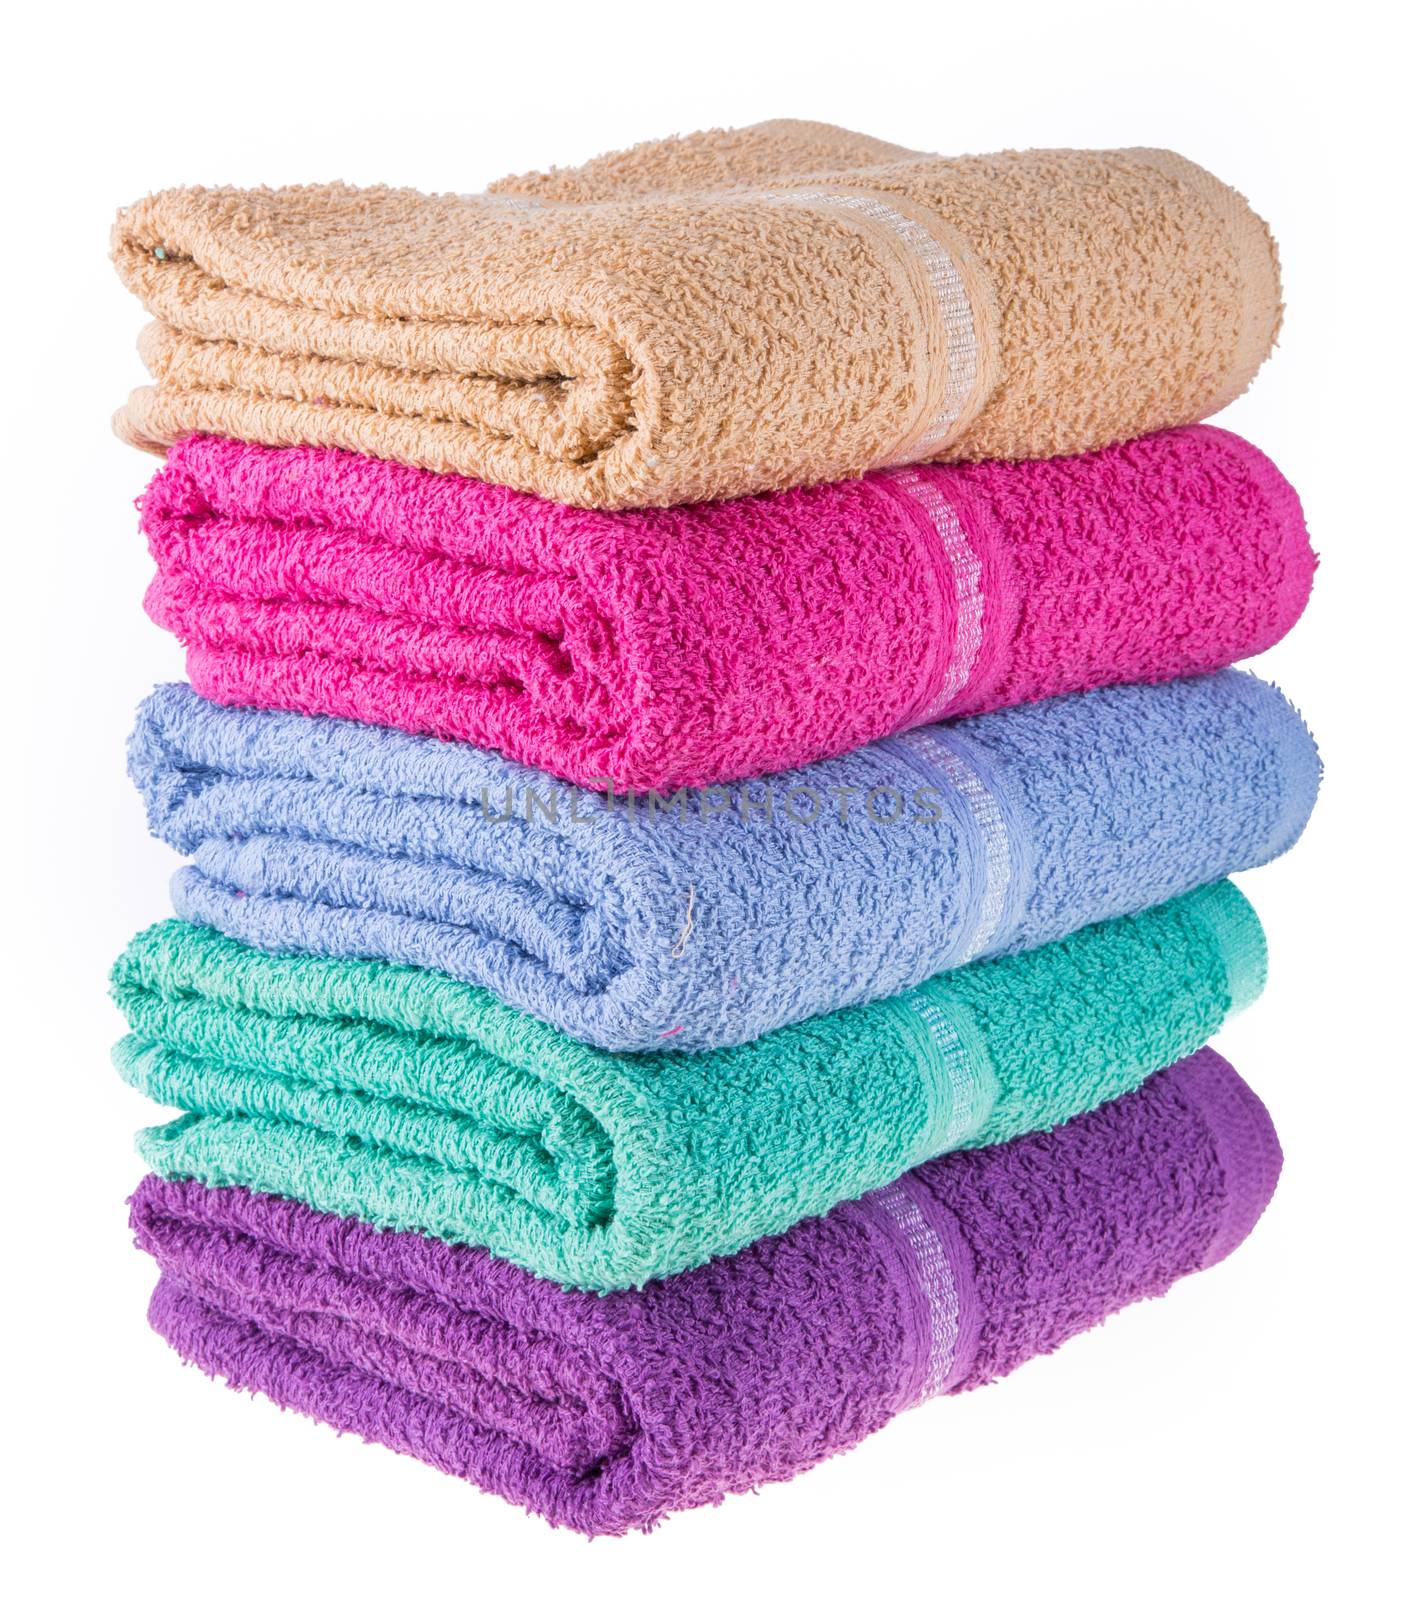 color towel by tehcheesiong